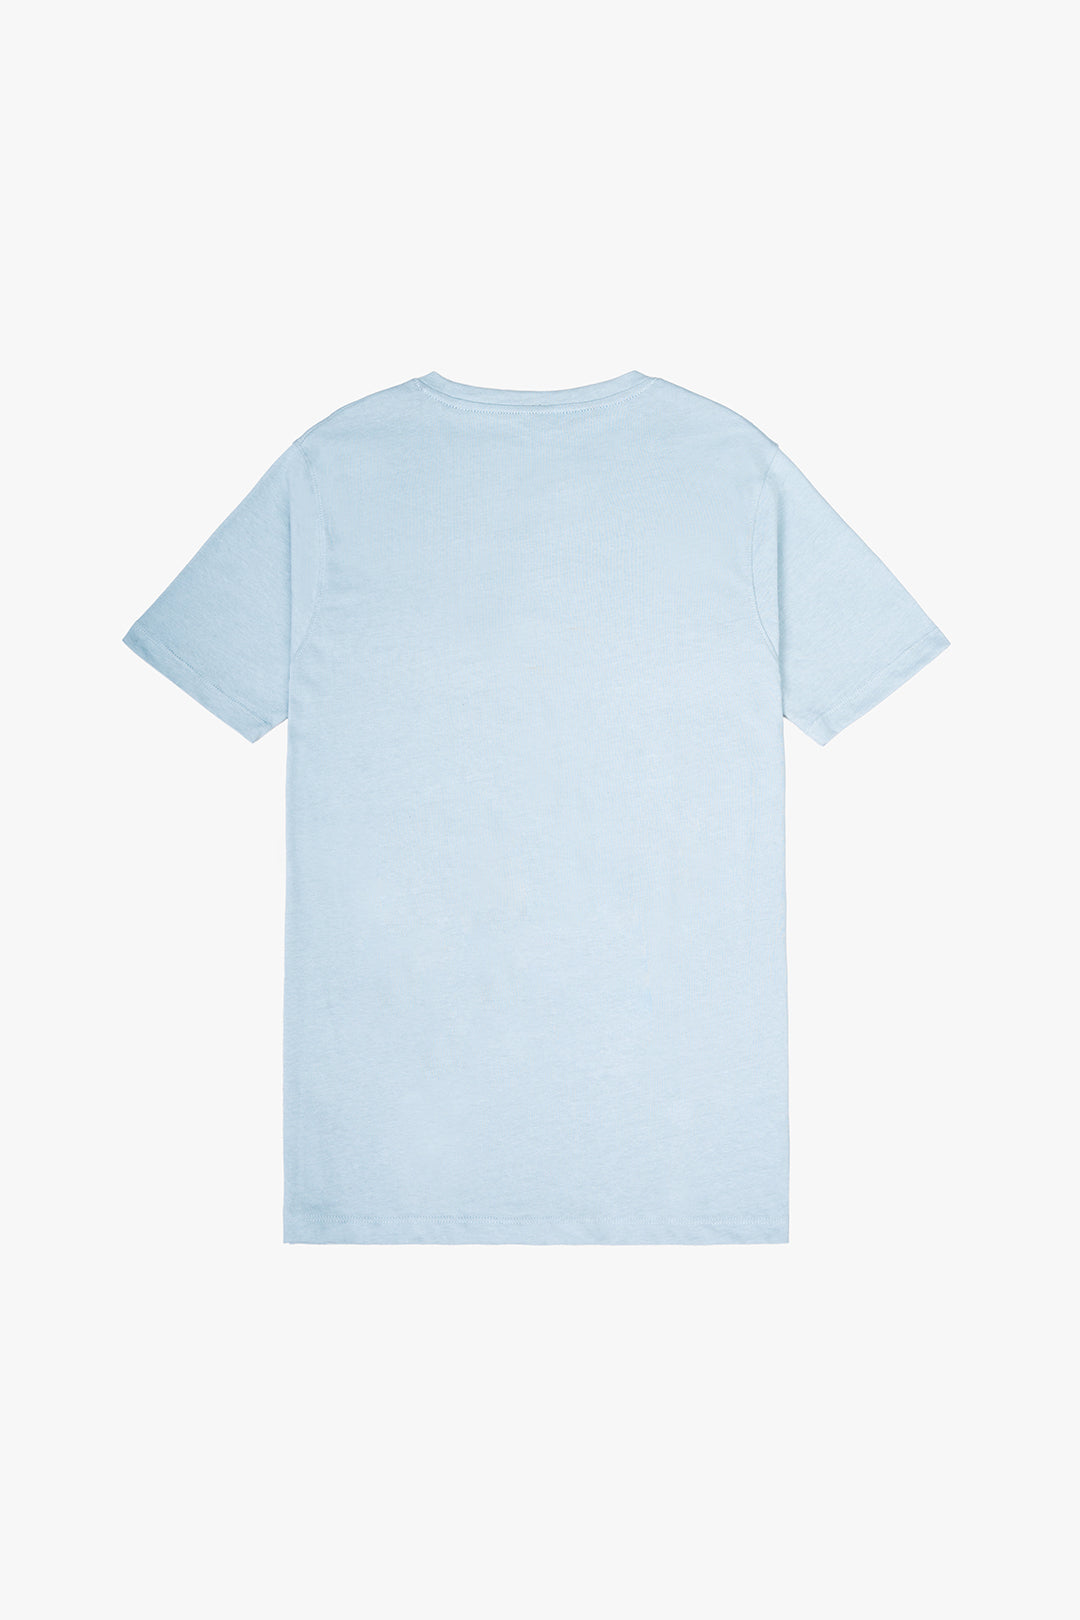 Men's Future Relaxed Fit Grafhic T-Shirt